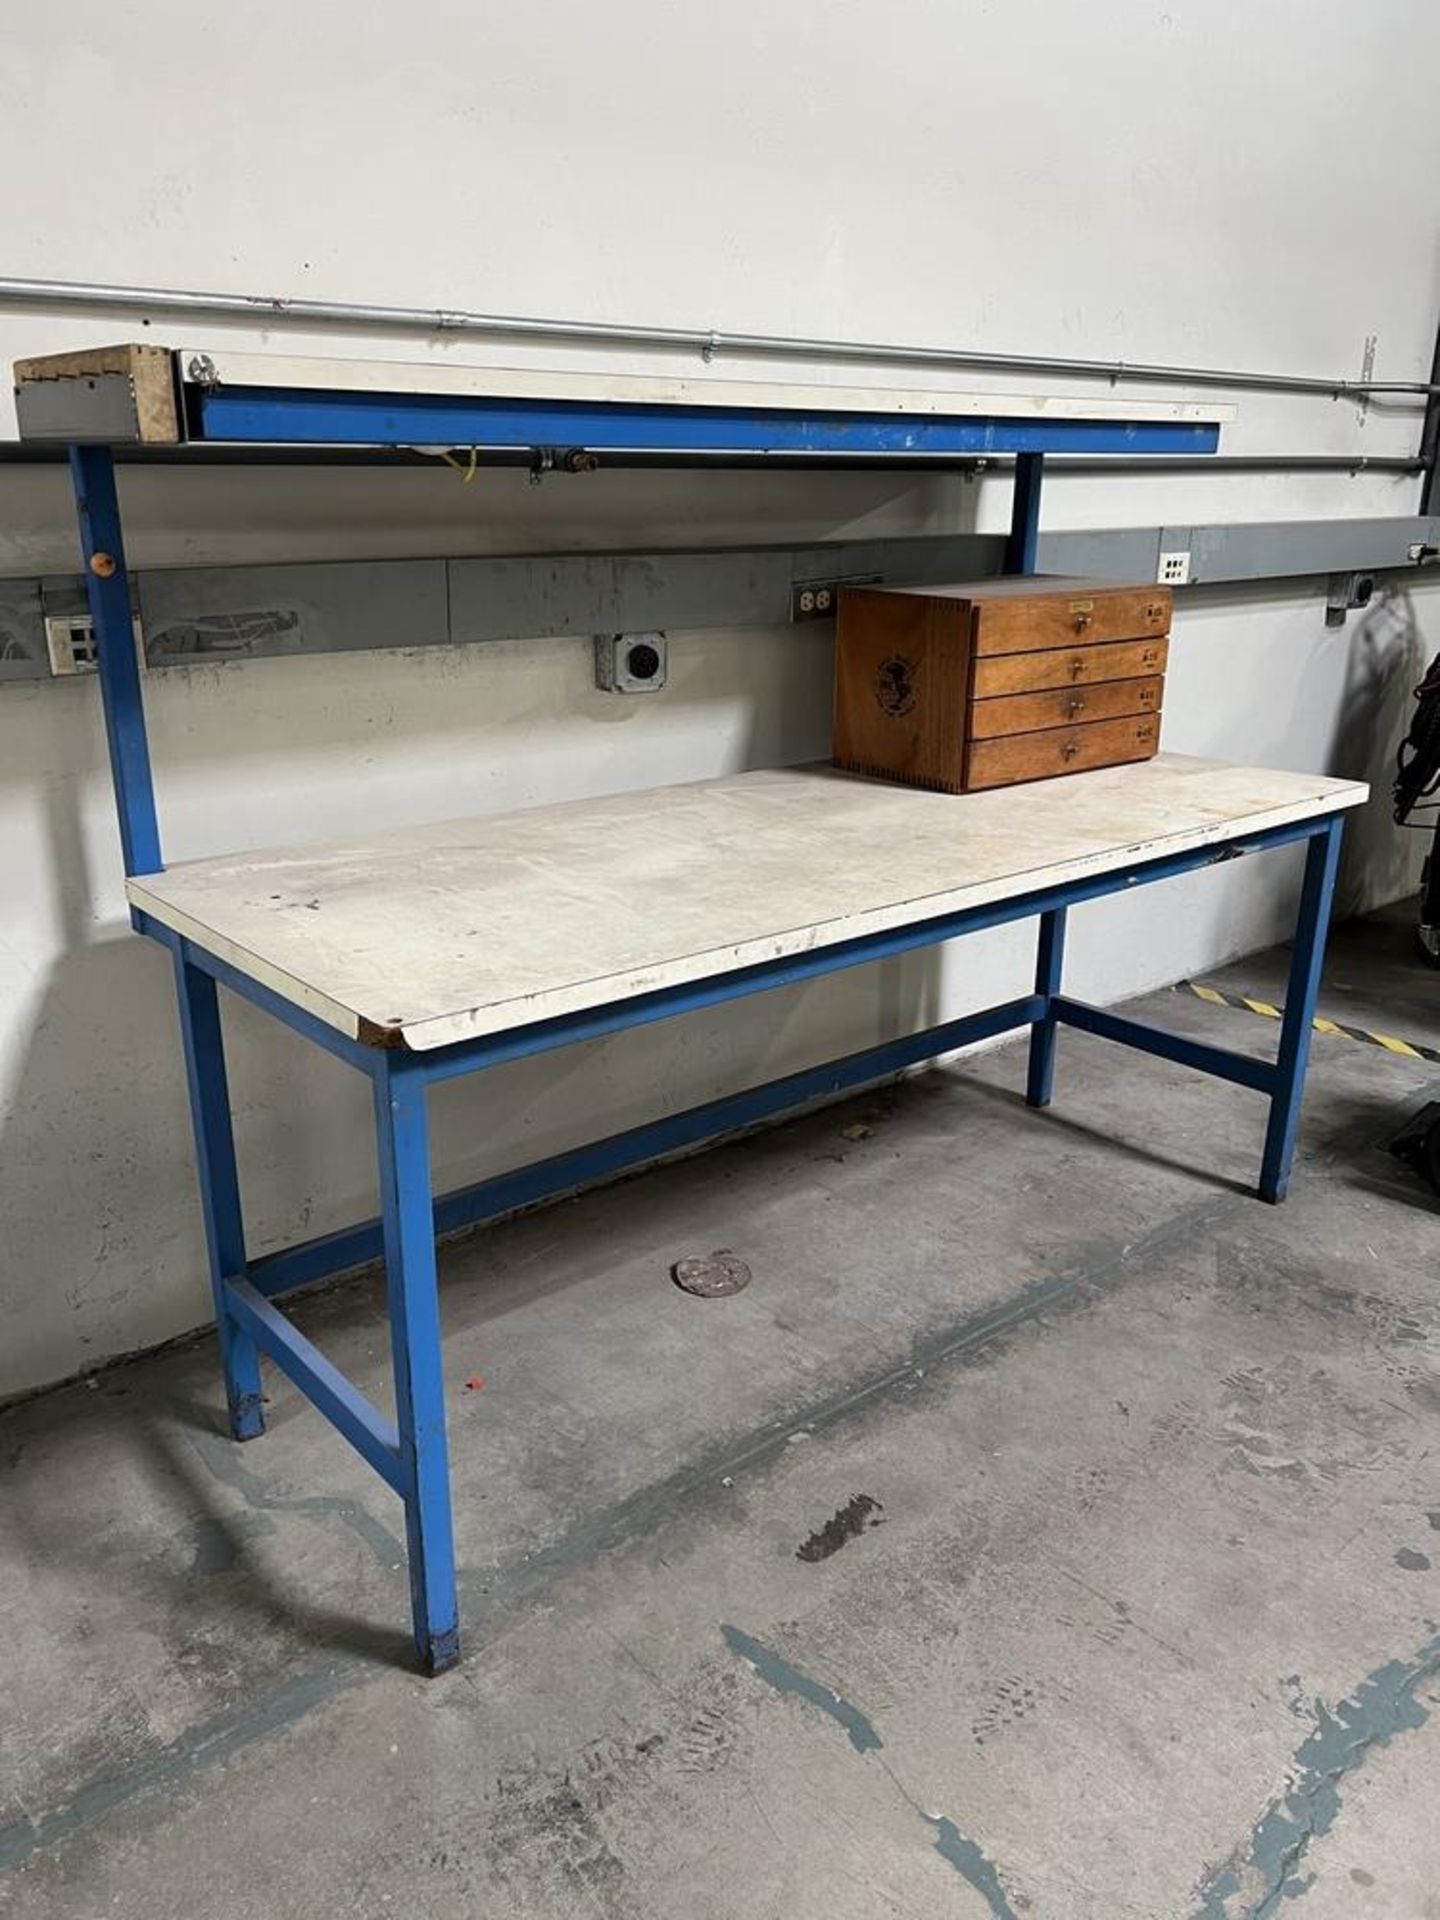 2 Tier Work Table 72" x 30" x 31" (No Other Contents)